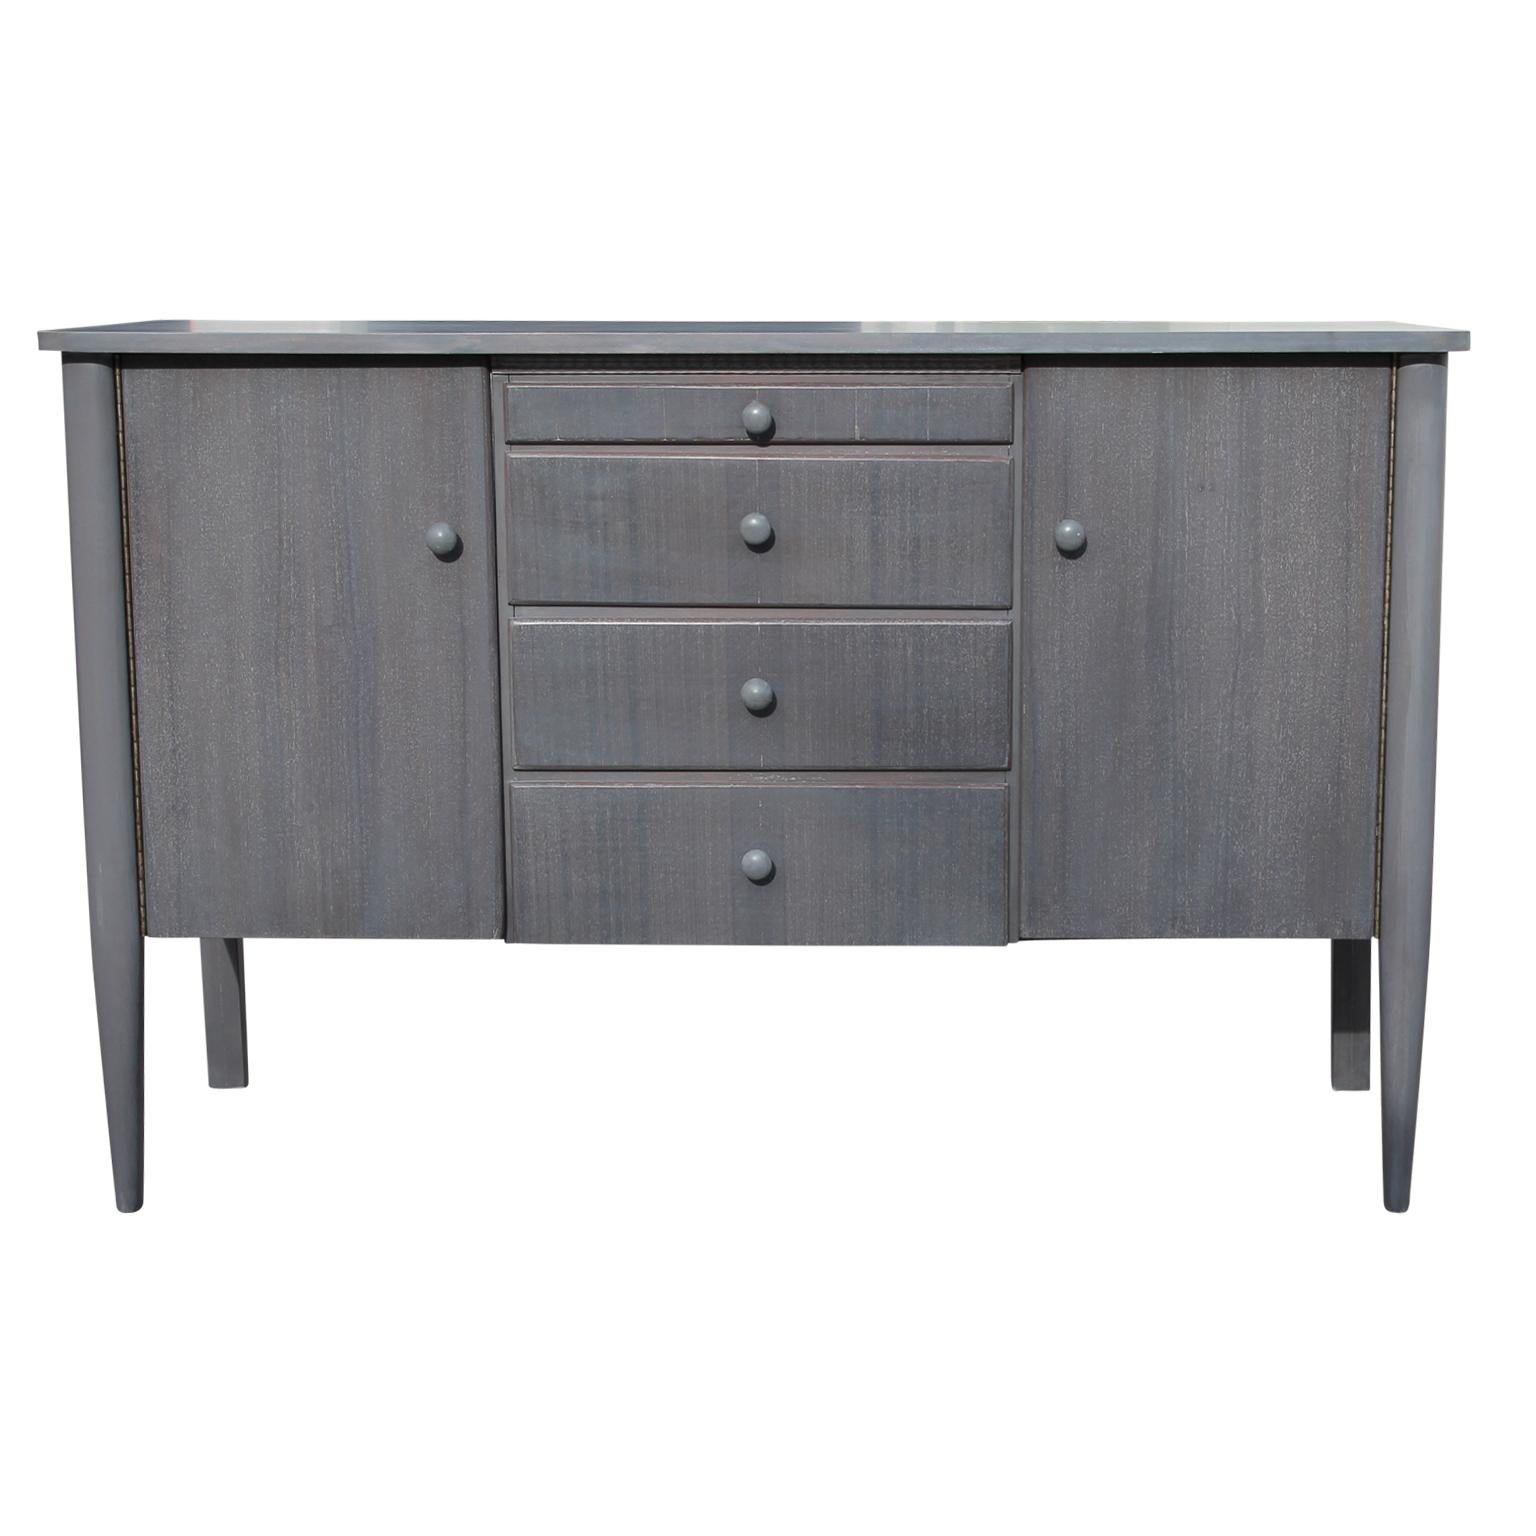 Grey cerused modern Danish style sideboard with two side cabinets on either side and three center drawers. The top one has an organizer and the very top thin one is a writing surface.